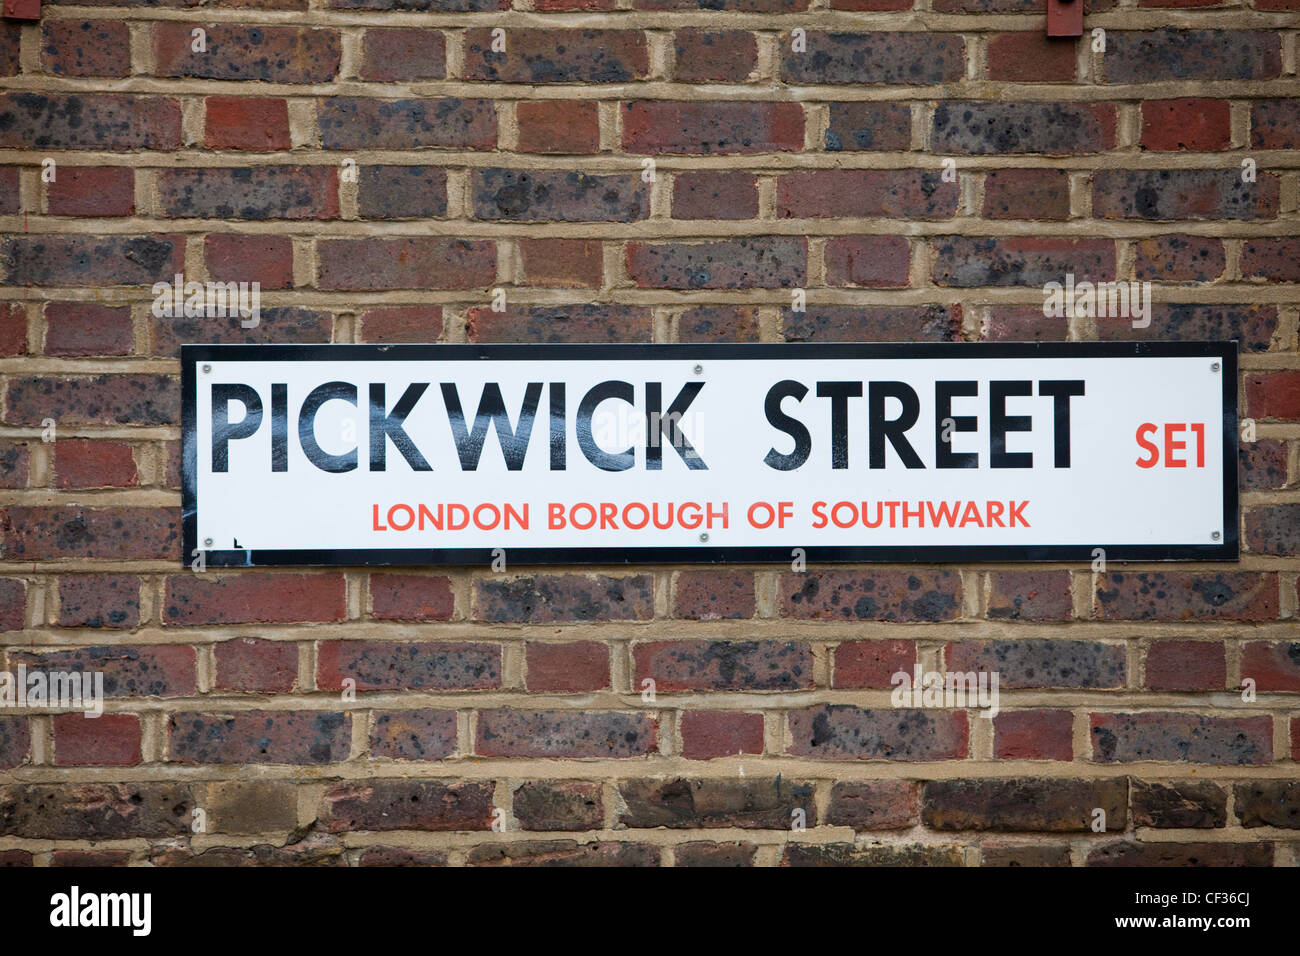 A view of a road sign for Pickwick Street in the London Borough of Southwark Stock Photo